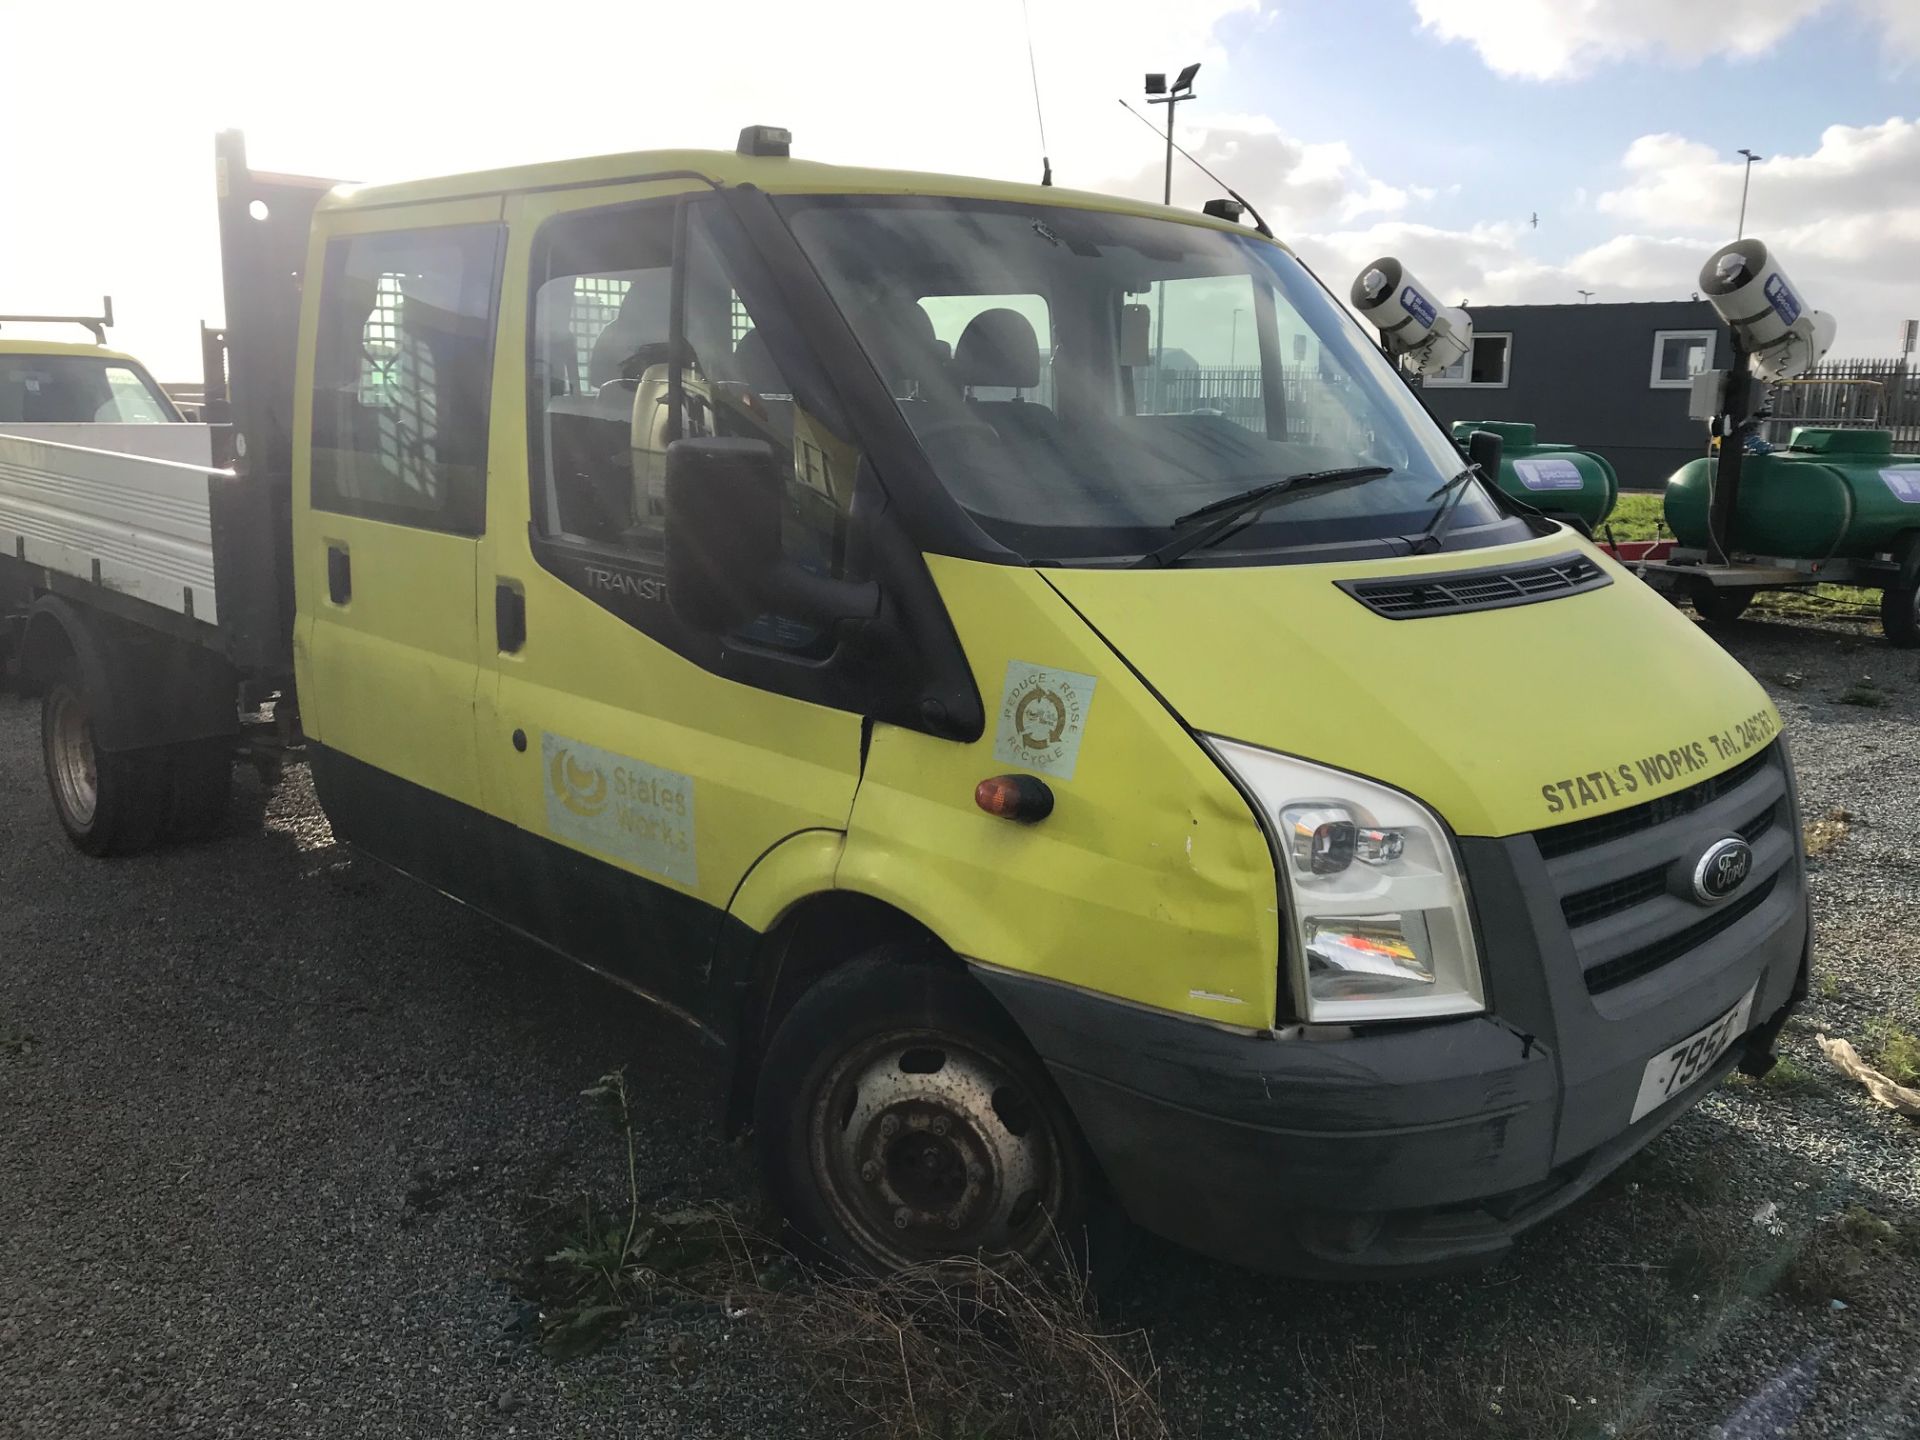 2010 Ford Transit Tipper - Image 2 of 6